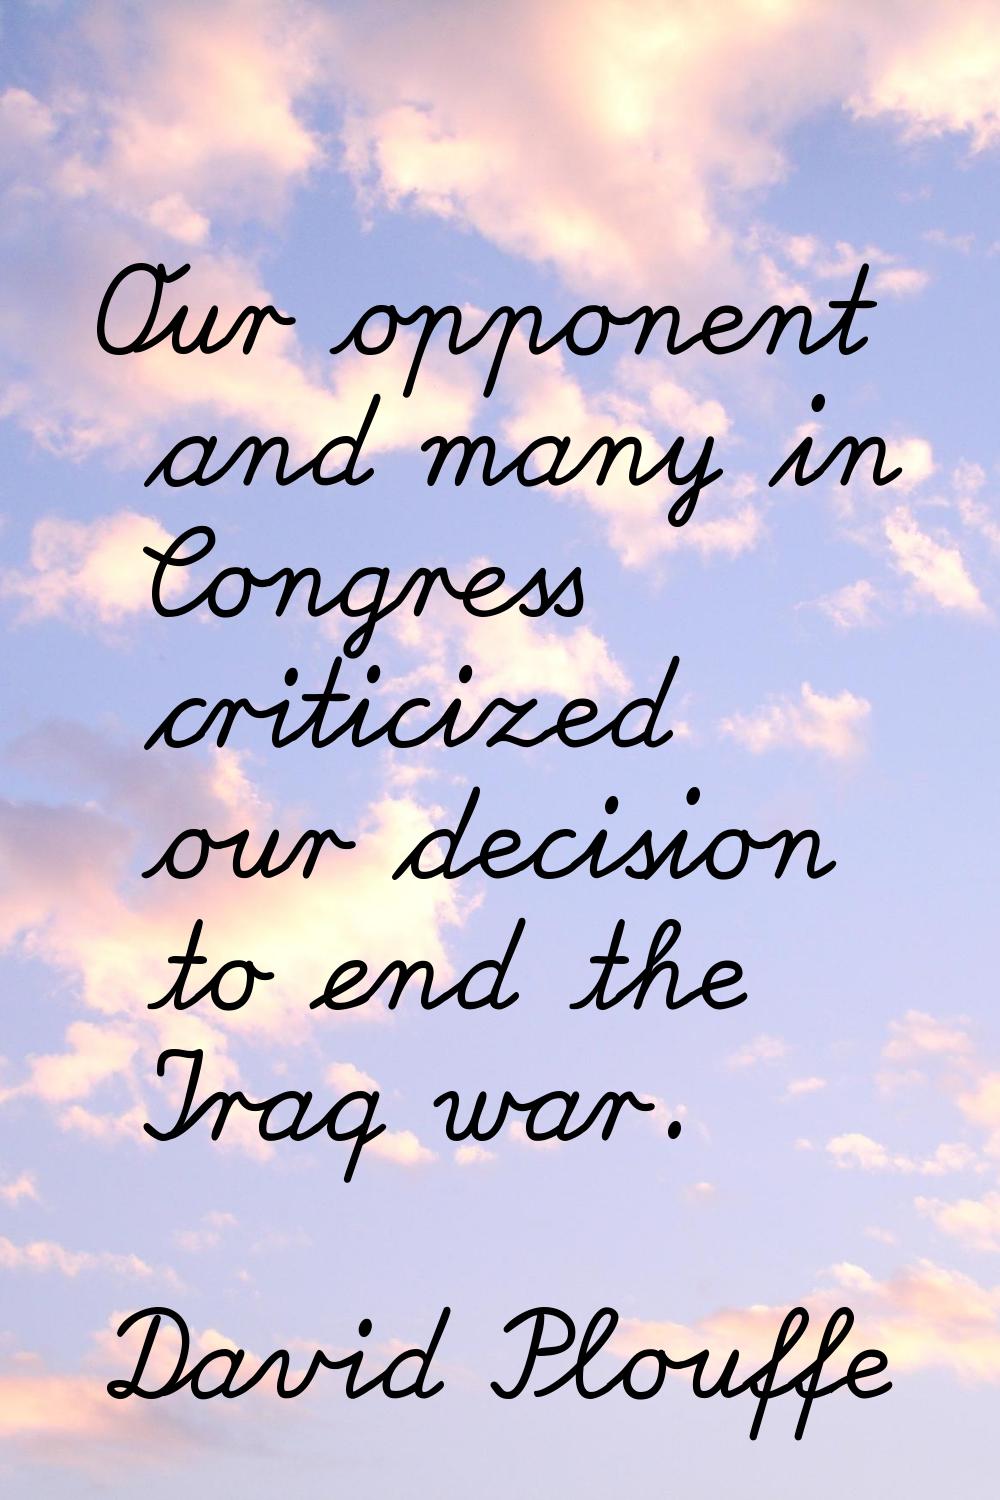 Our opponent and many in Congress criticized our decision to end the Iraq war.